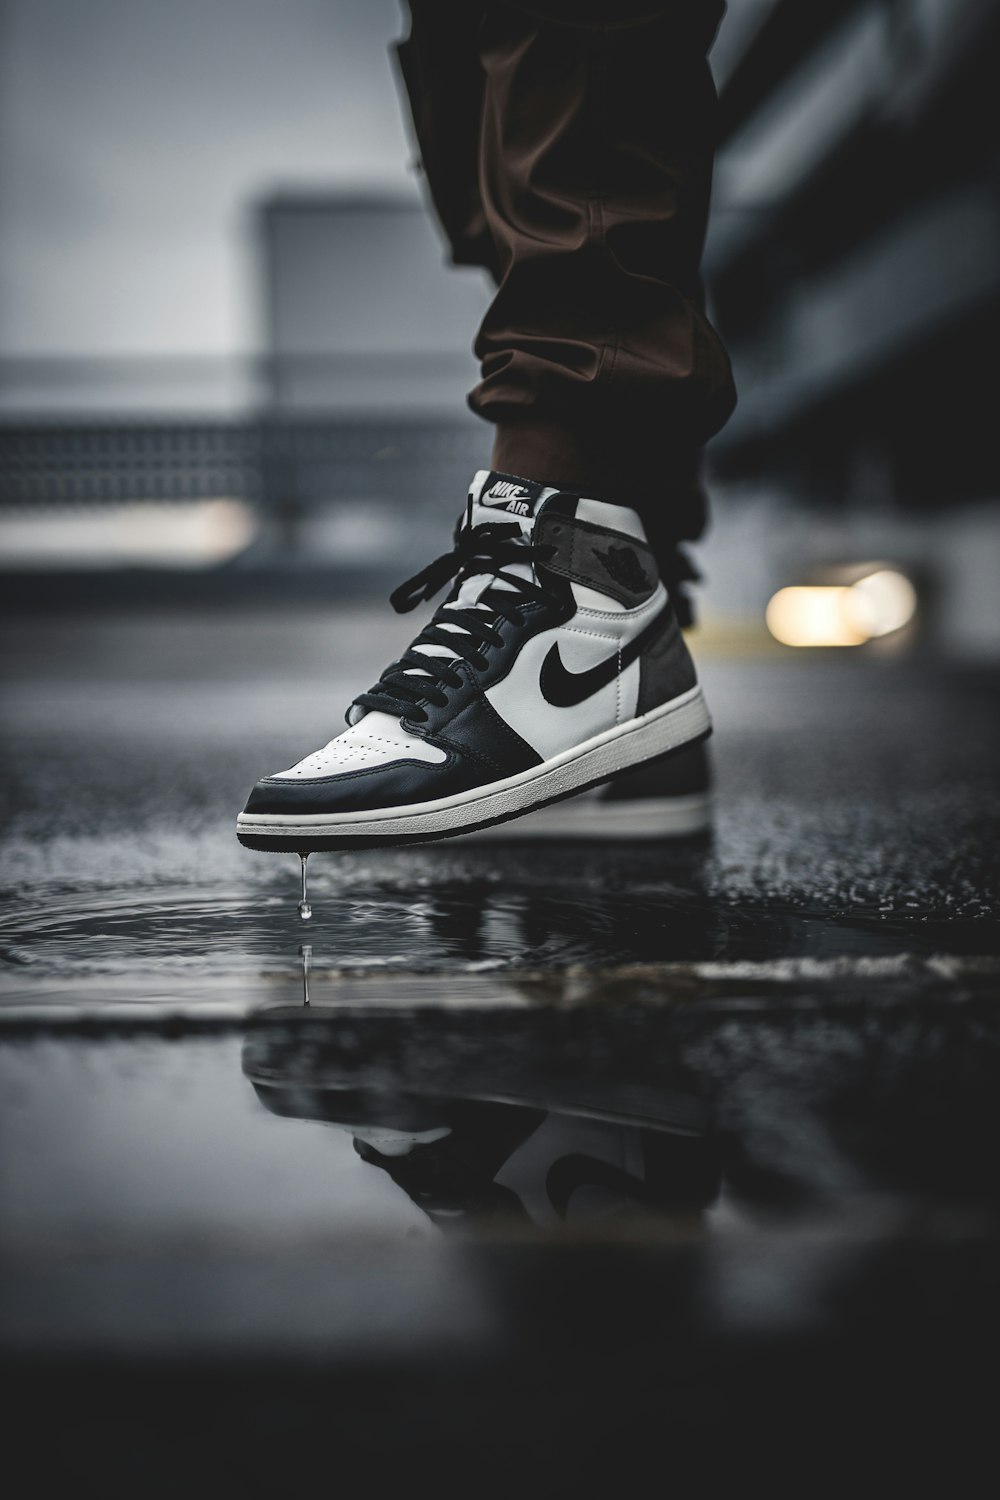 Nike Sneaker Pictures | Download Free Images on Unsplash